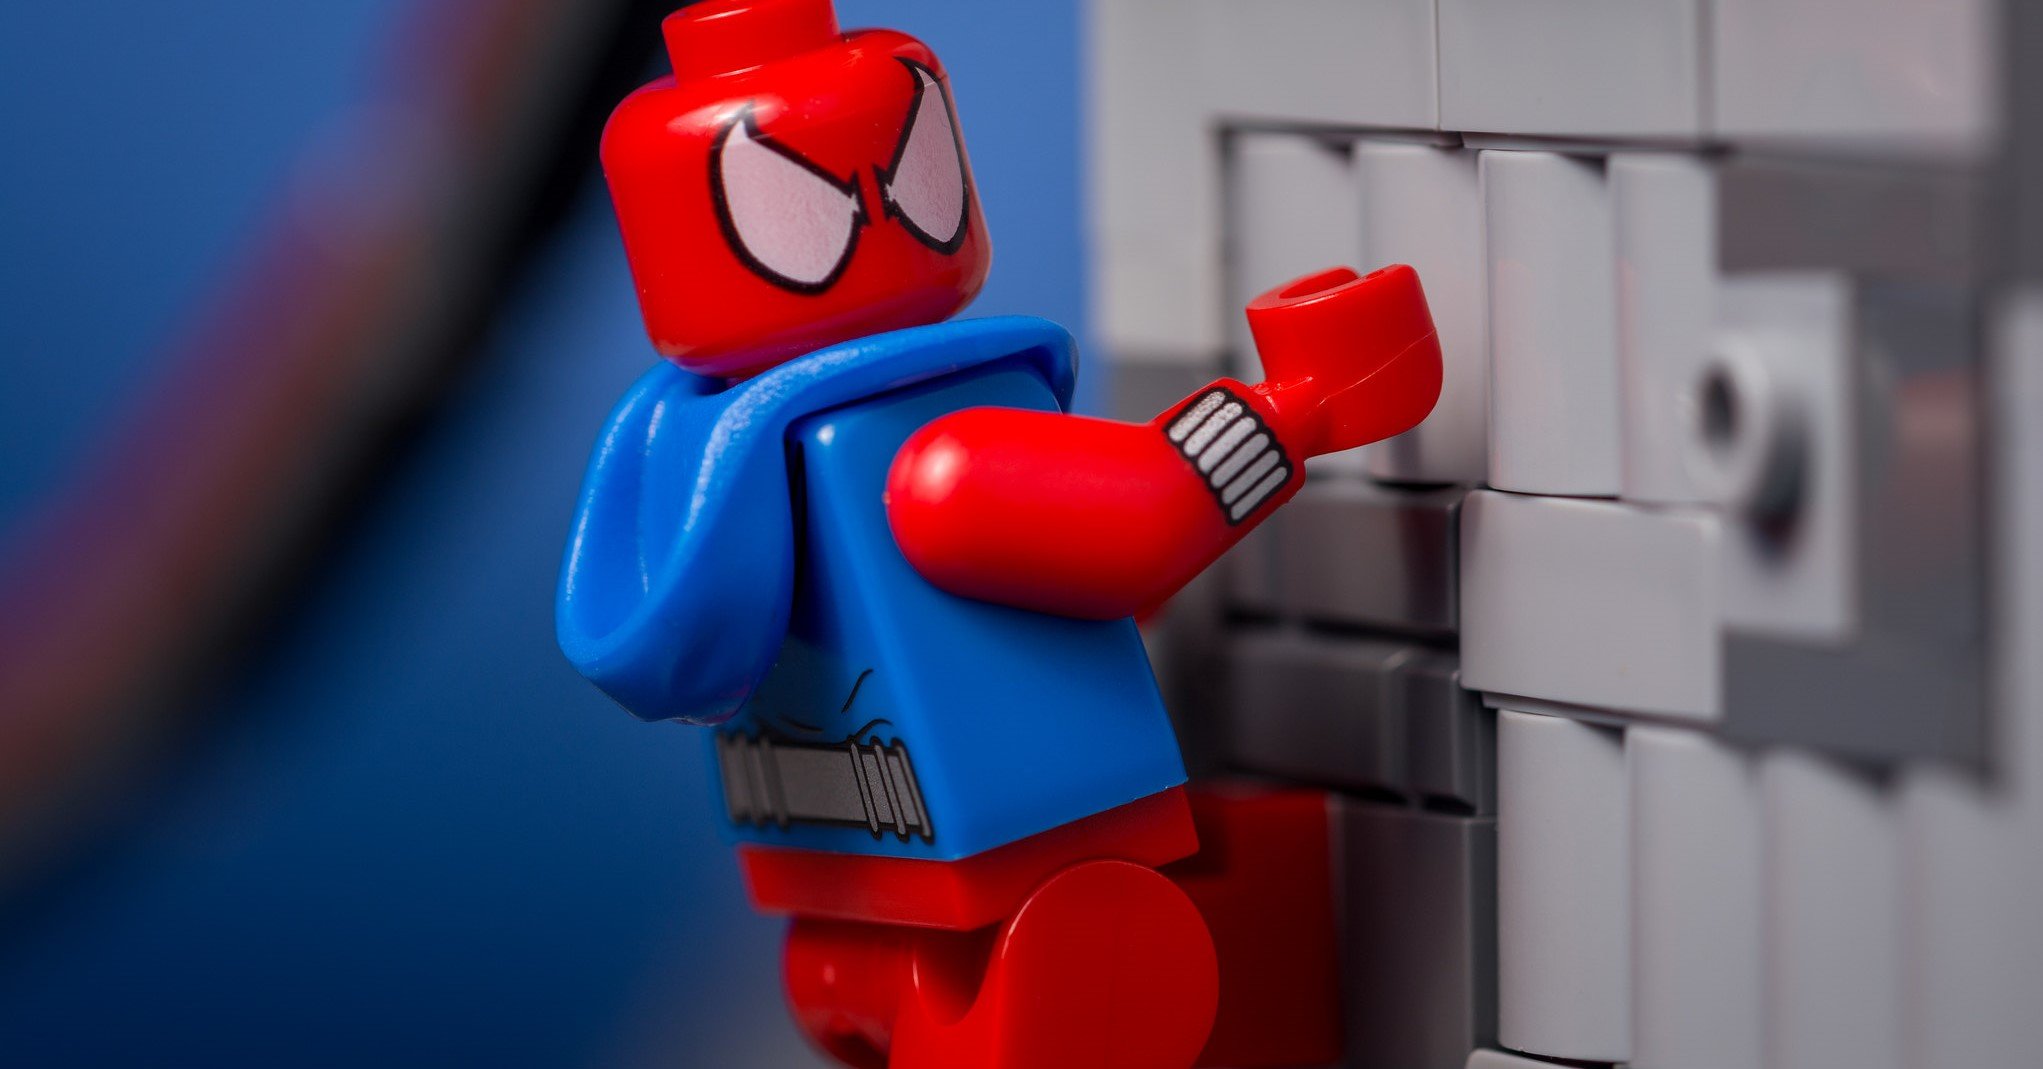 lego spider man - How to Do Pull-ups Without a Bar (5 Alternatives)